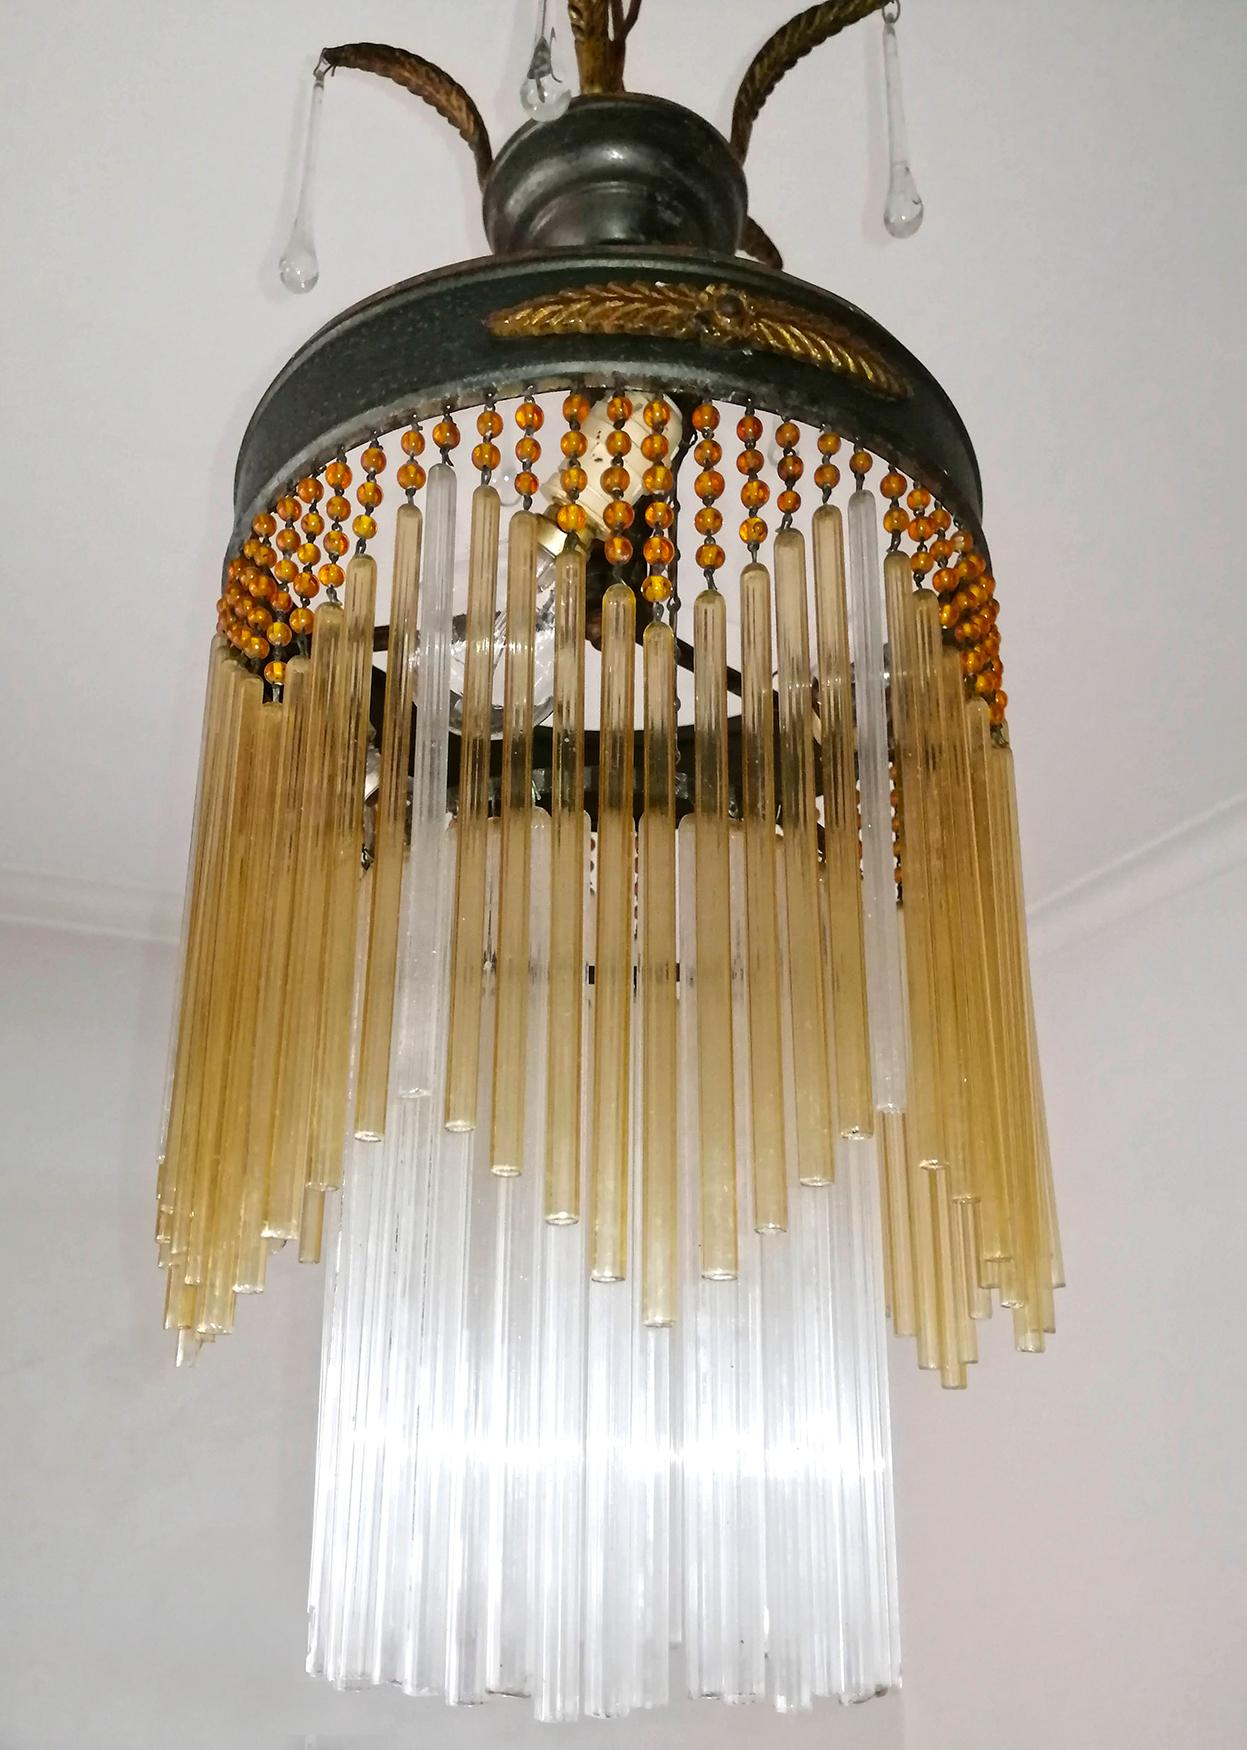 Antique French chandelier in amber beaded glass tubes, Art Deco / Art Nouveau.
Dimensions:
Height 36.23 in. (chain = 10 in.) /92 cm (chain = 25 cm)
Diameter 9.85 in. (25 cm)
3-light bulb E14/ good working condition
Assembly required. Bulbs not